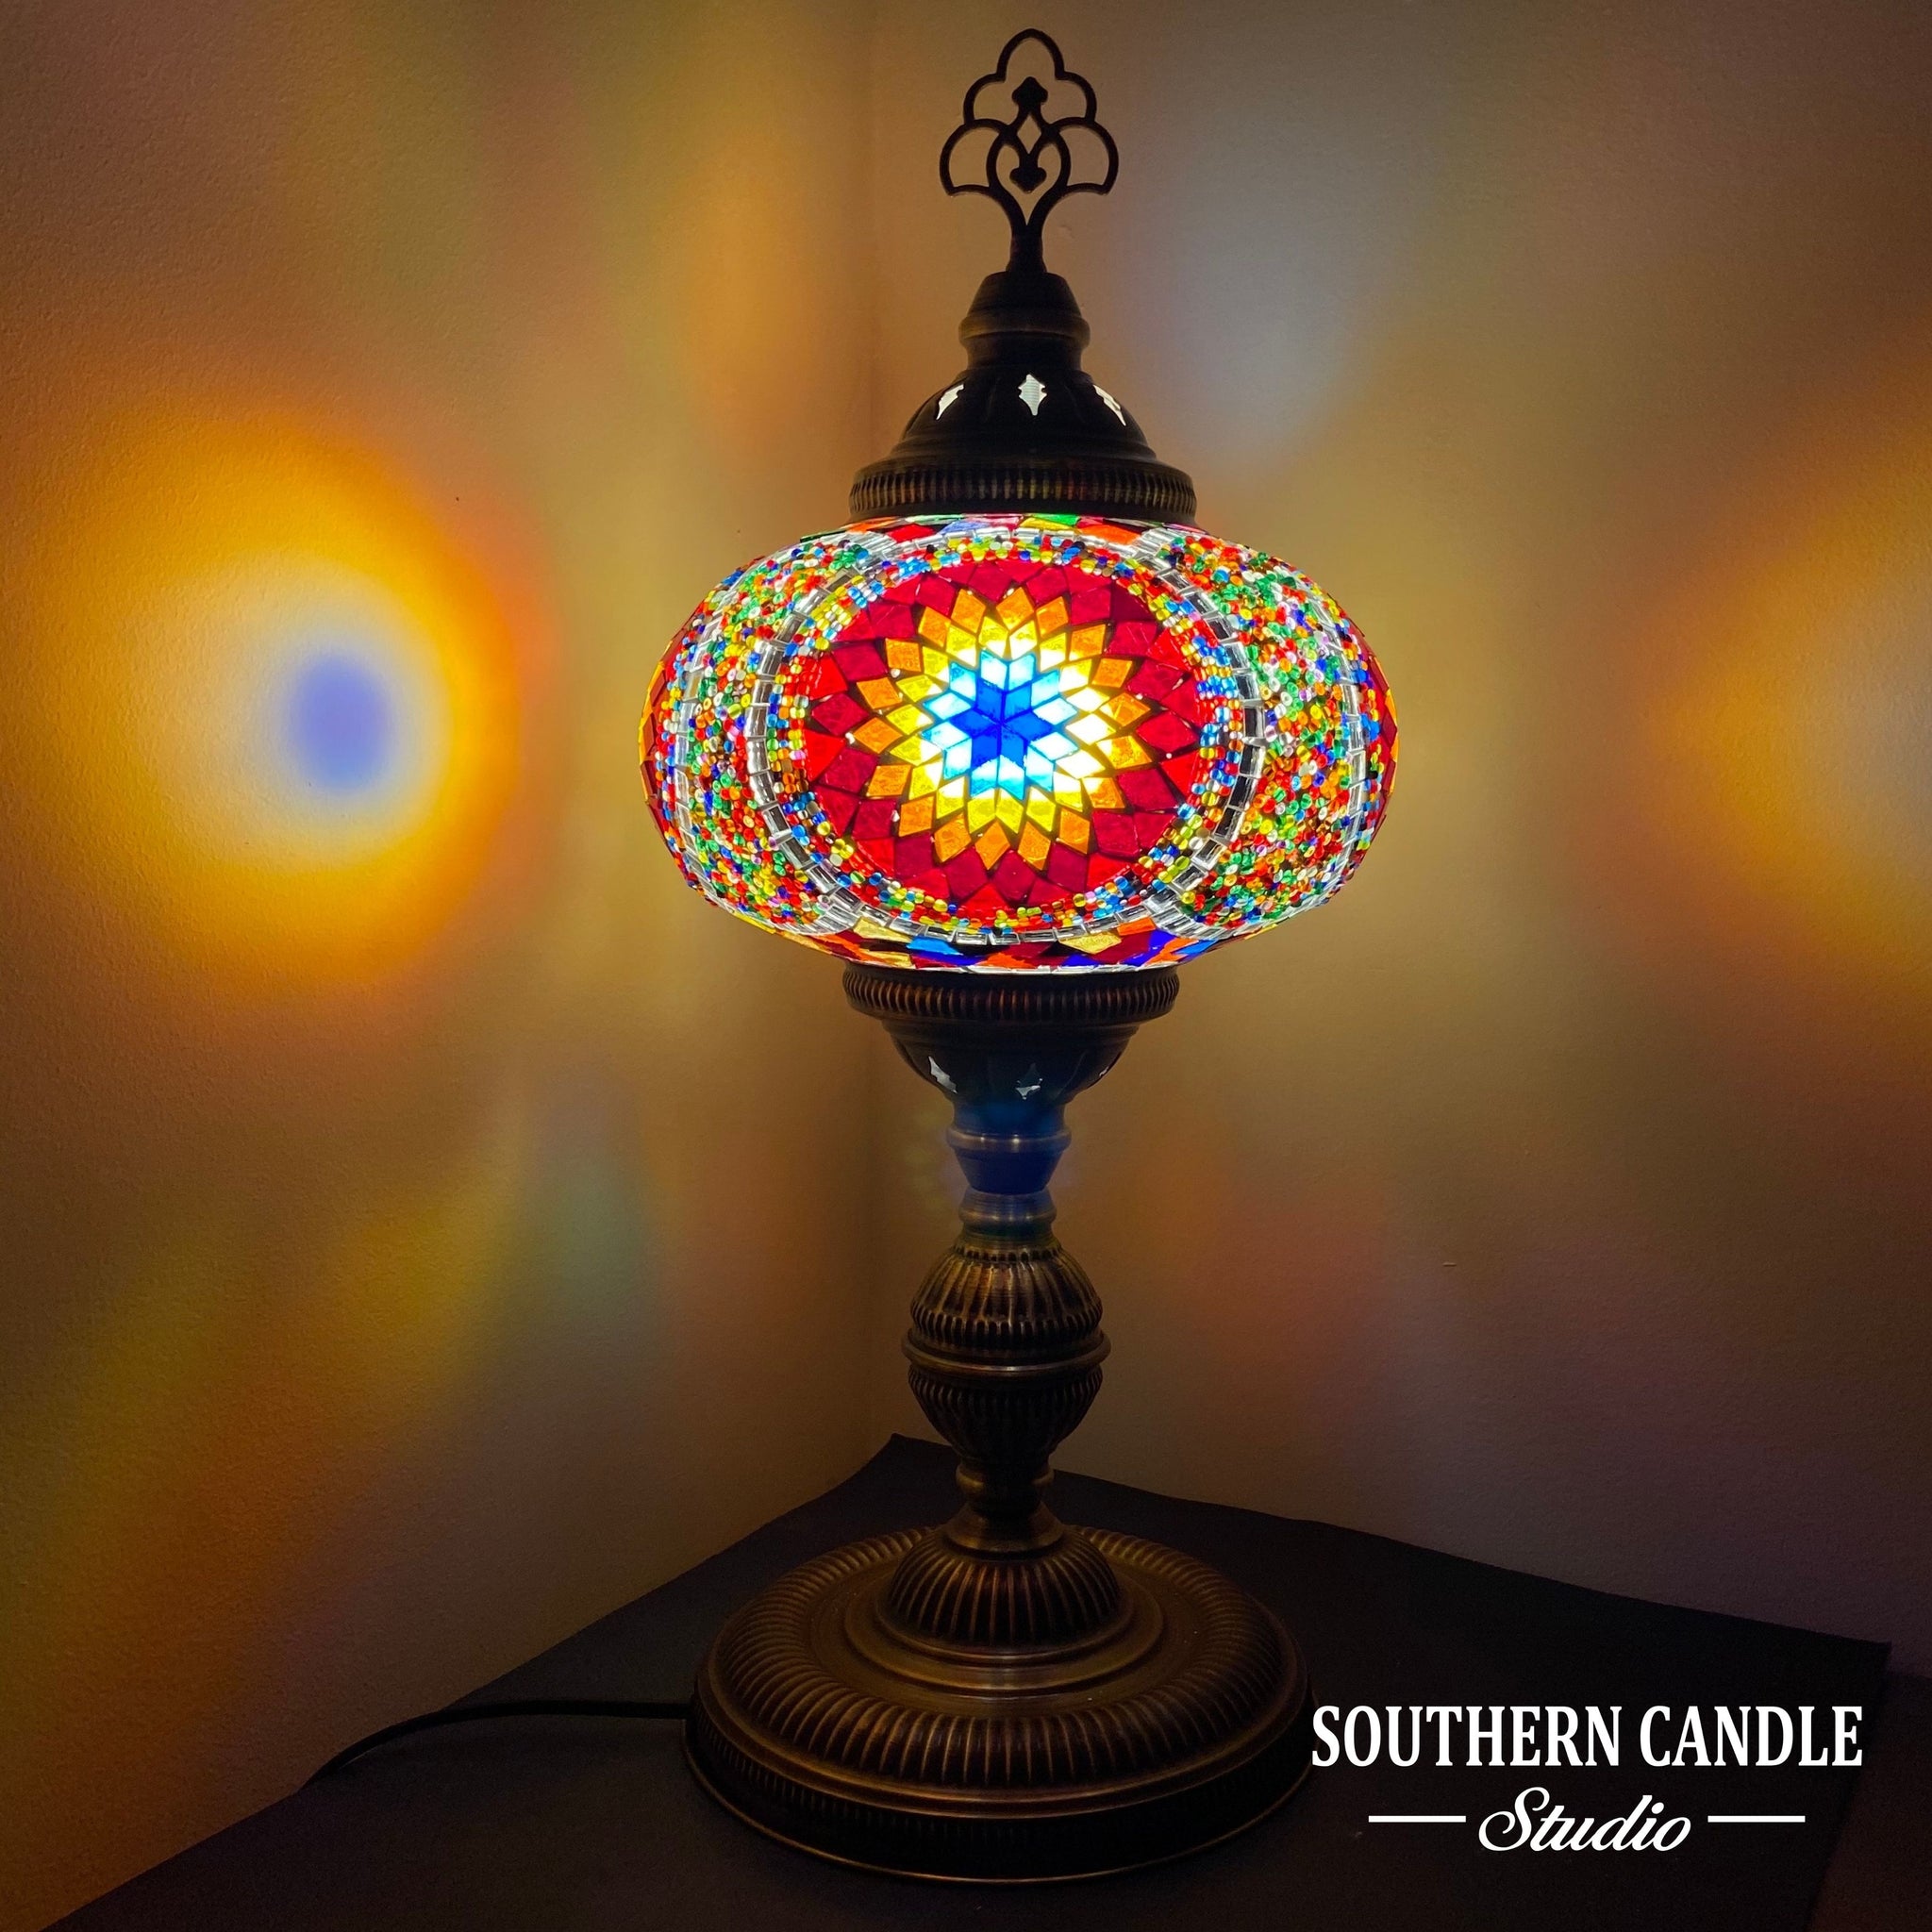 Southern Candle Studio  Handcrafted Turkish Mosaic Lamps